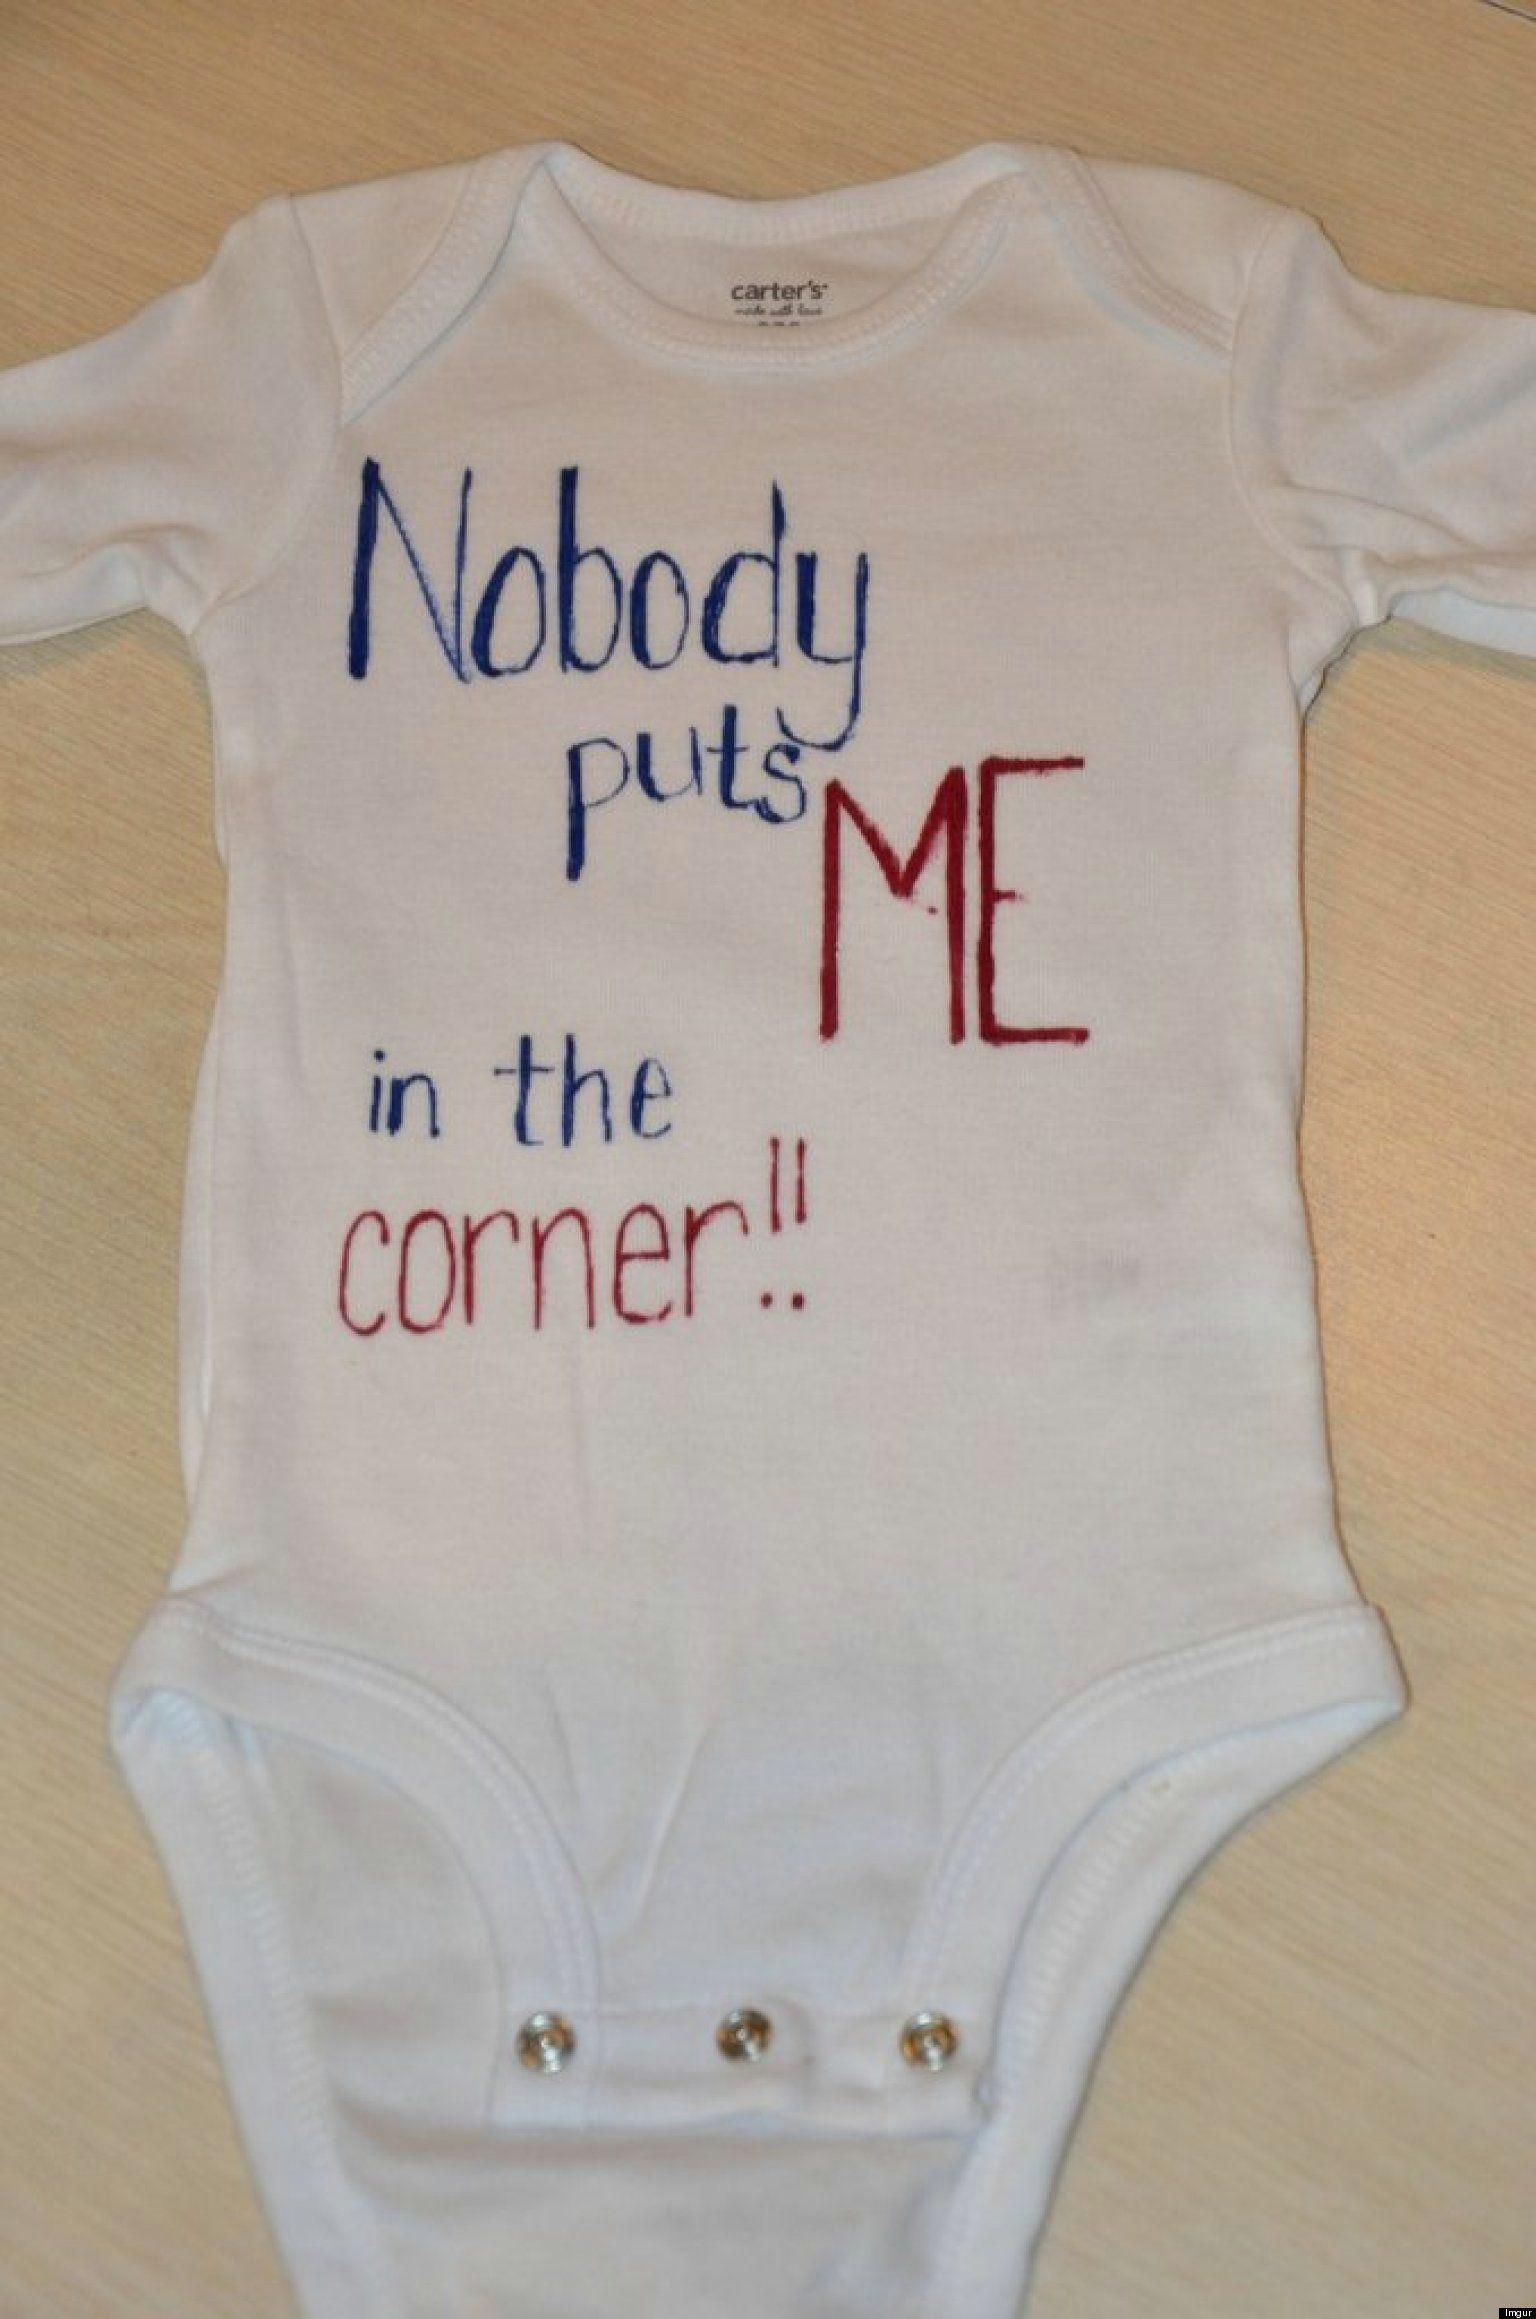 decorate onesies baby shower game fun baby shower idea drawing on baby clothes with markers photos